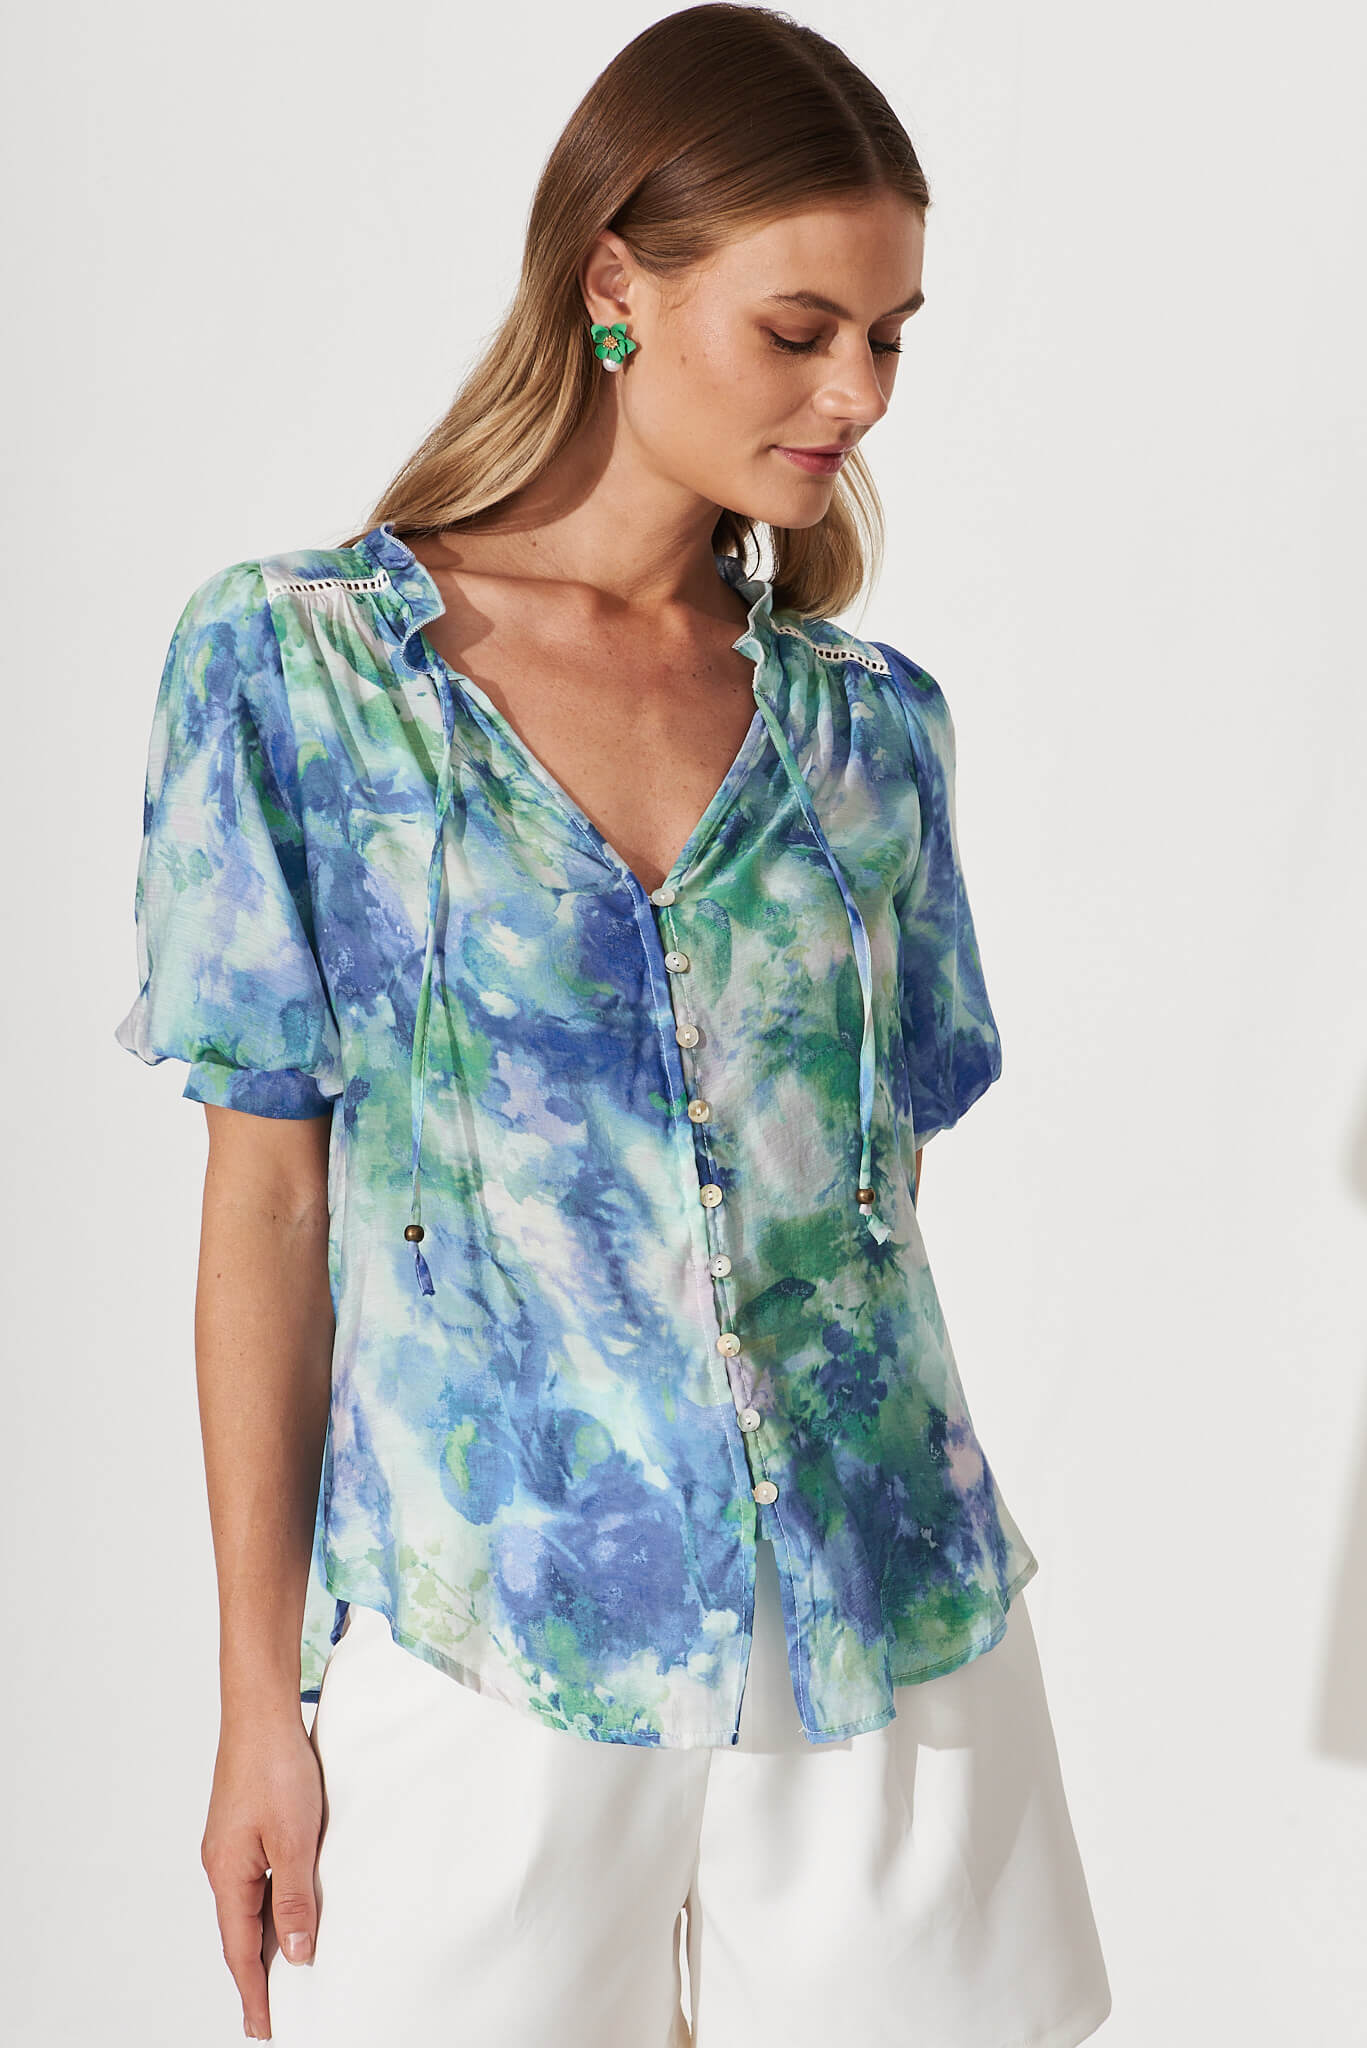 Jupiter Shirt In Blue With Green Watercolour Print - front